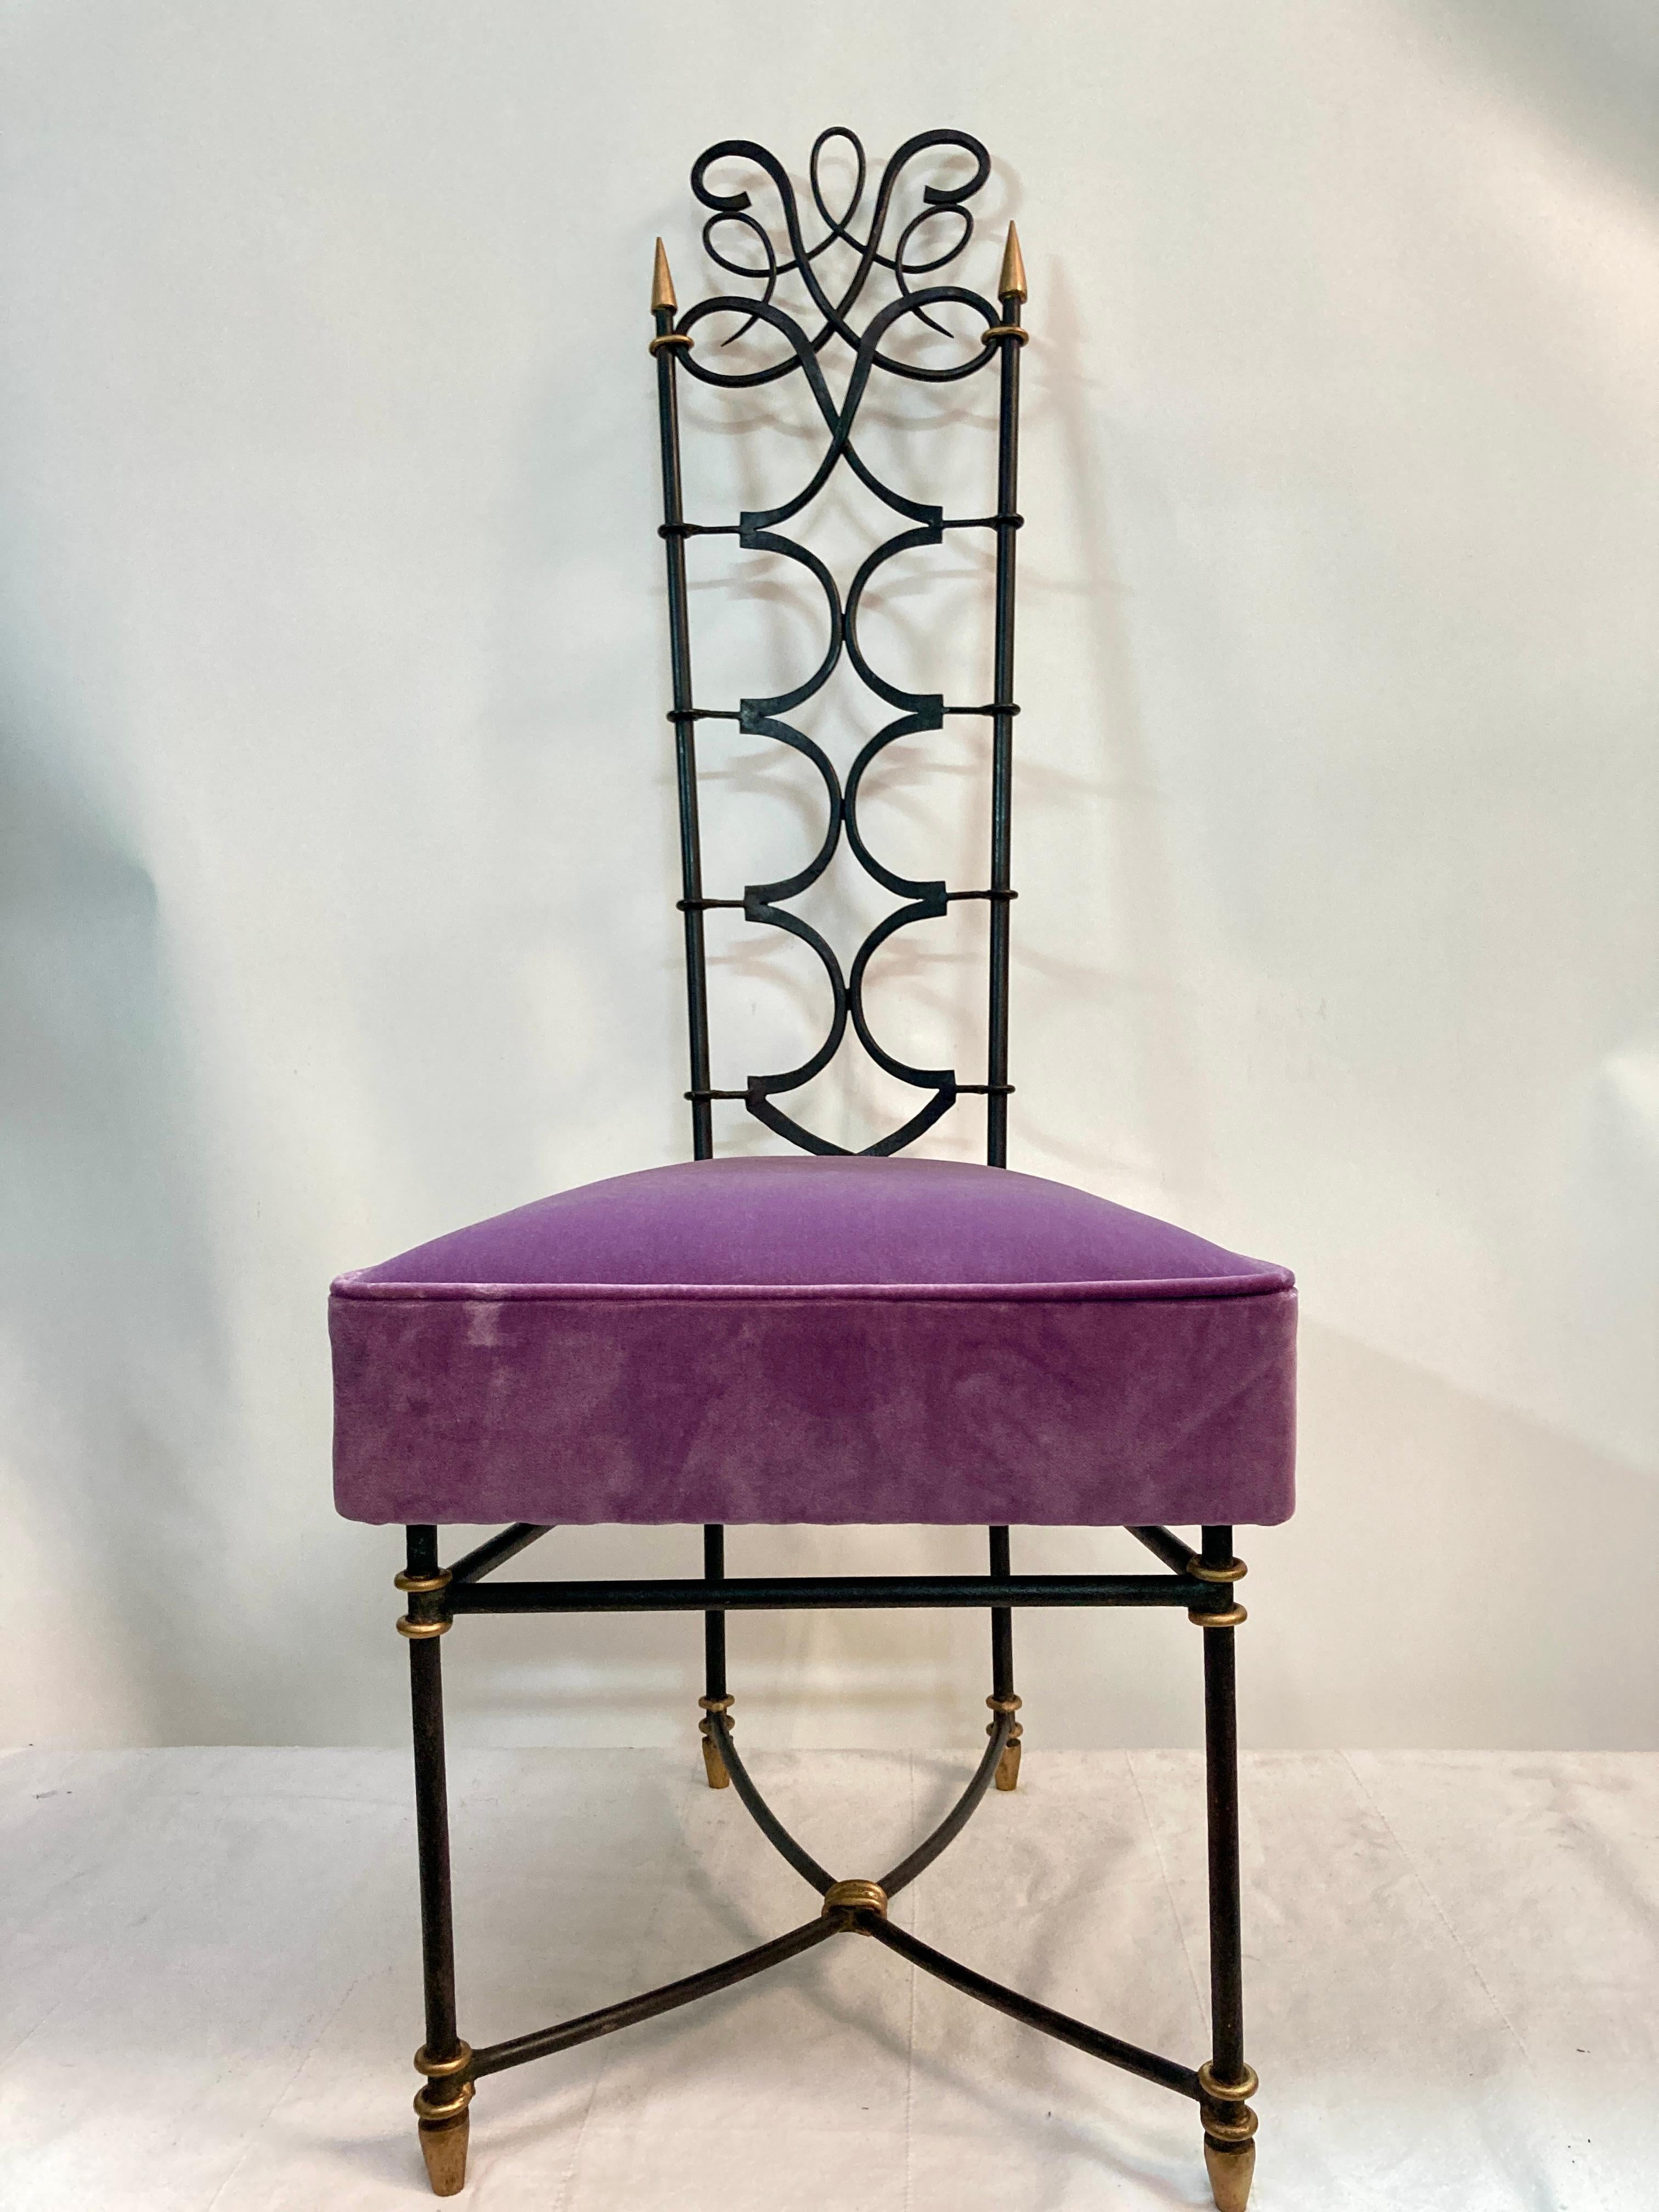 Very unusual pair of tall wrought iron chairs
upholstered with purple velvet
Great condition
France